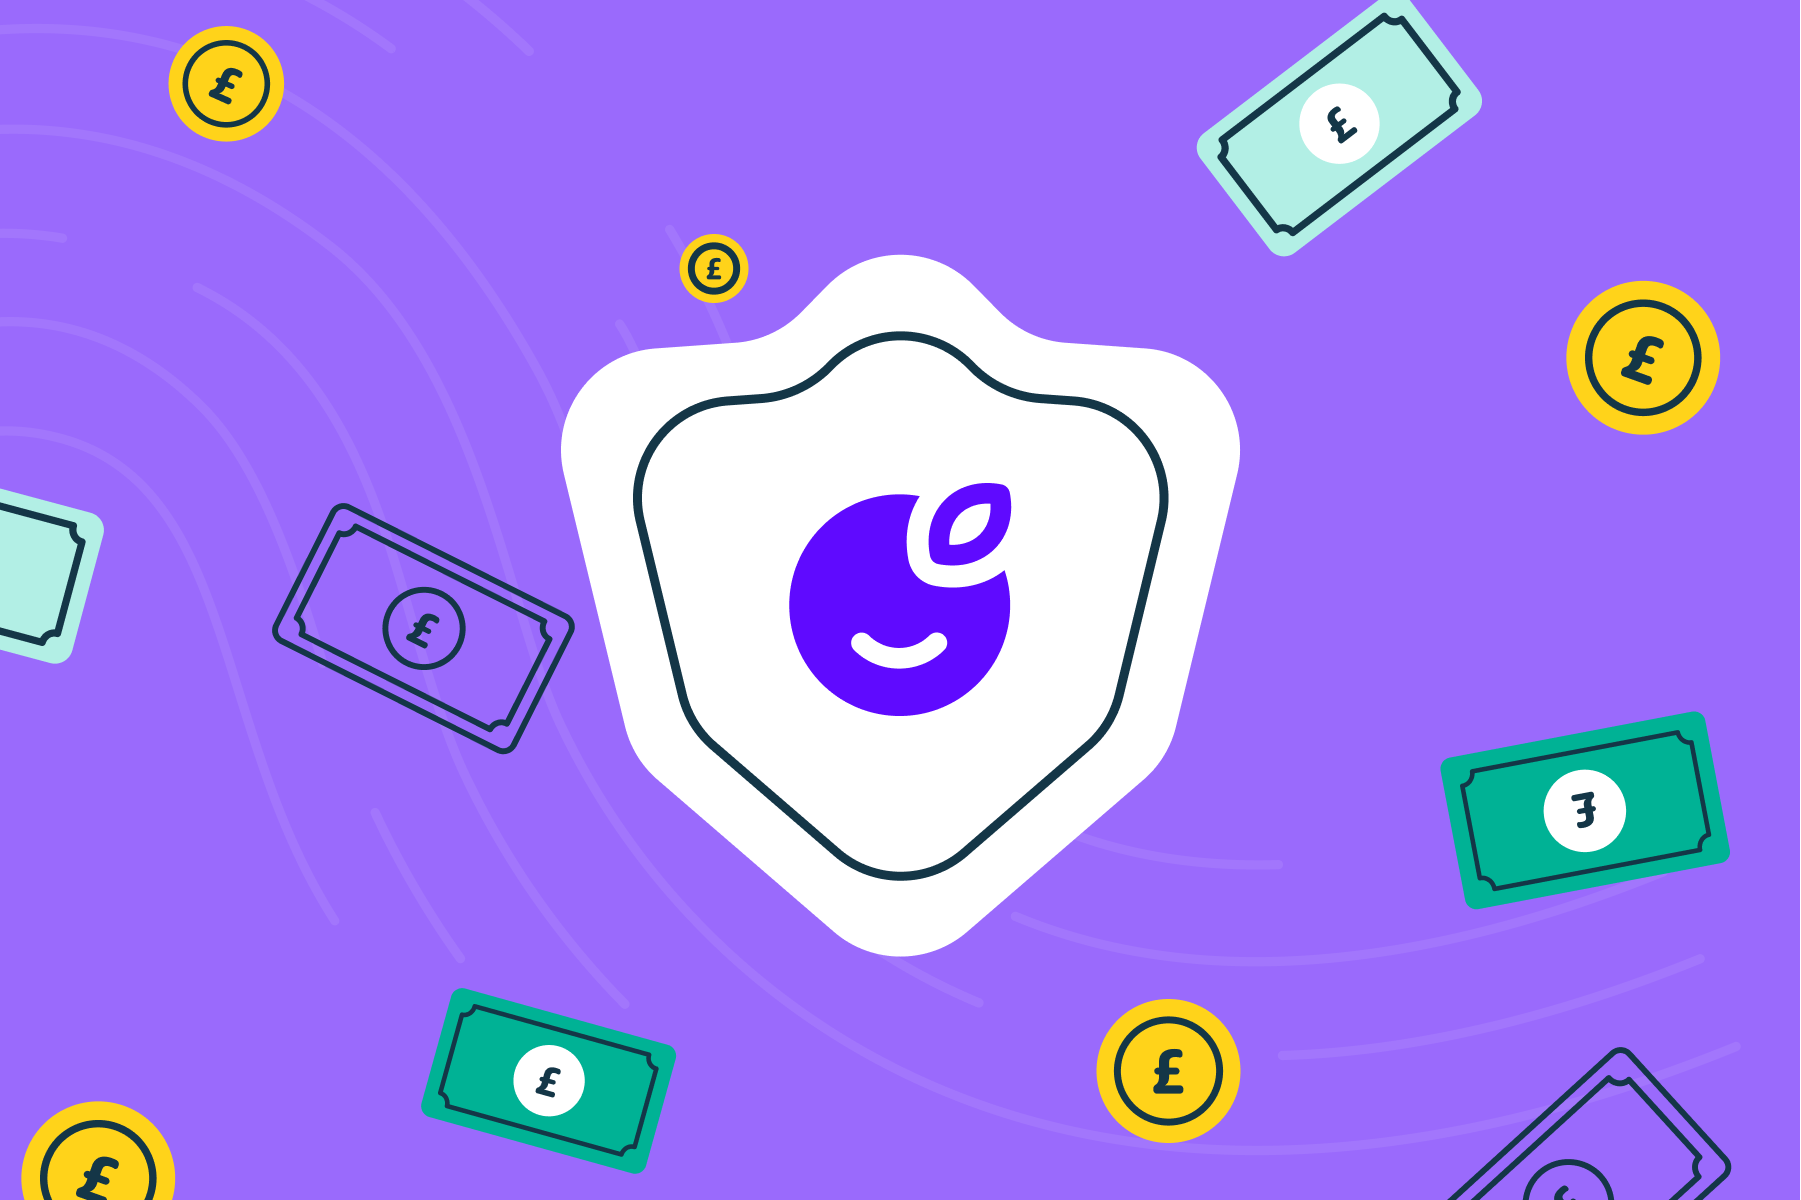 How is money protected with Plum?